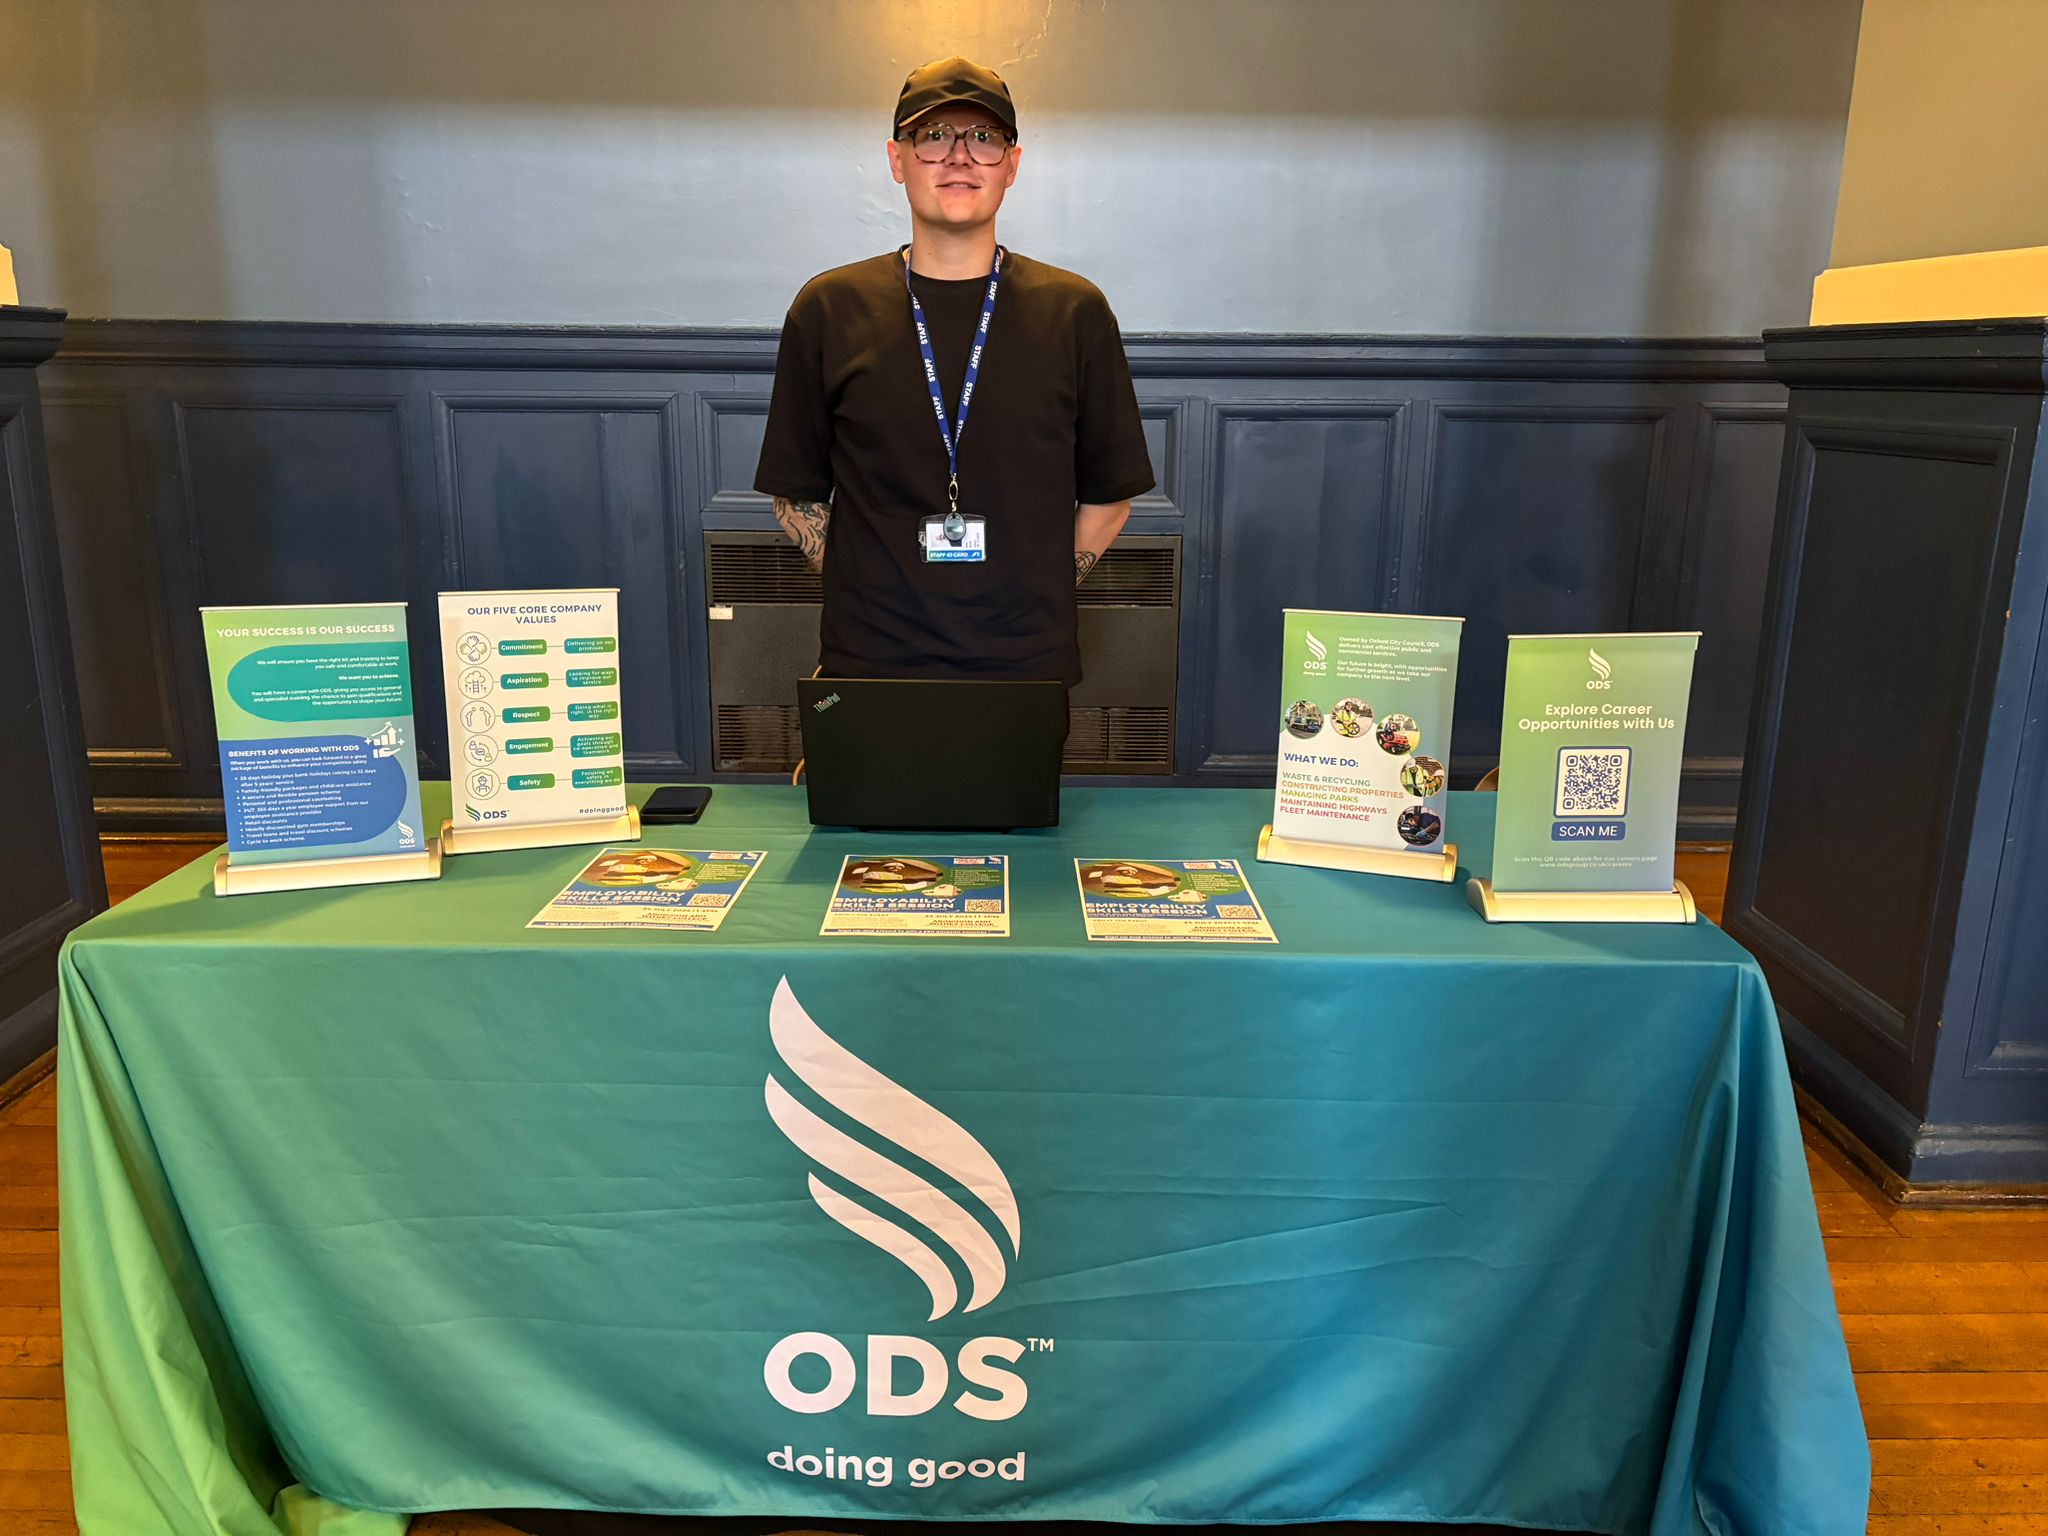 ODS at our event in Oxford